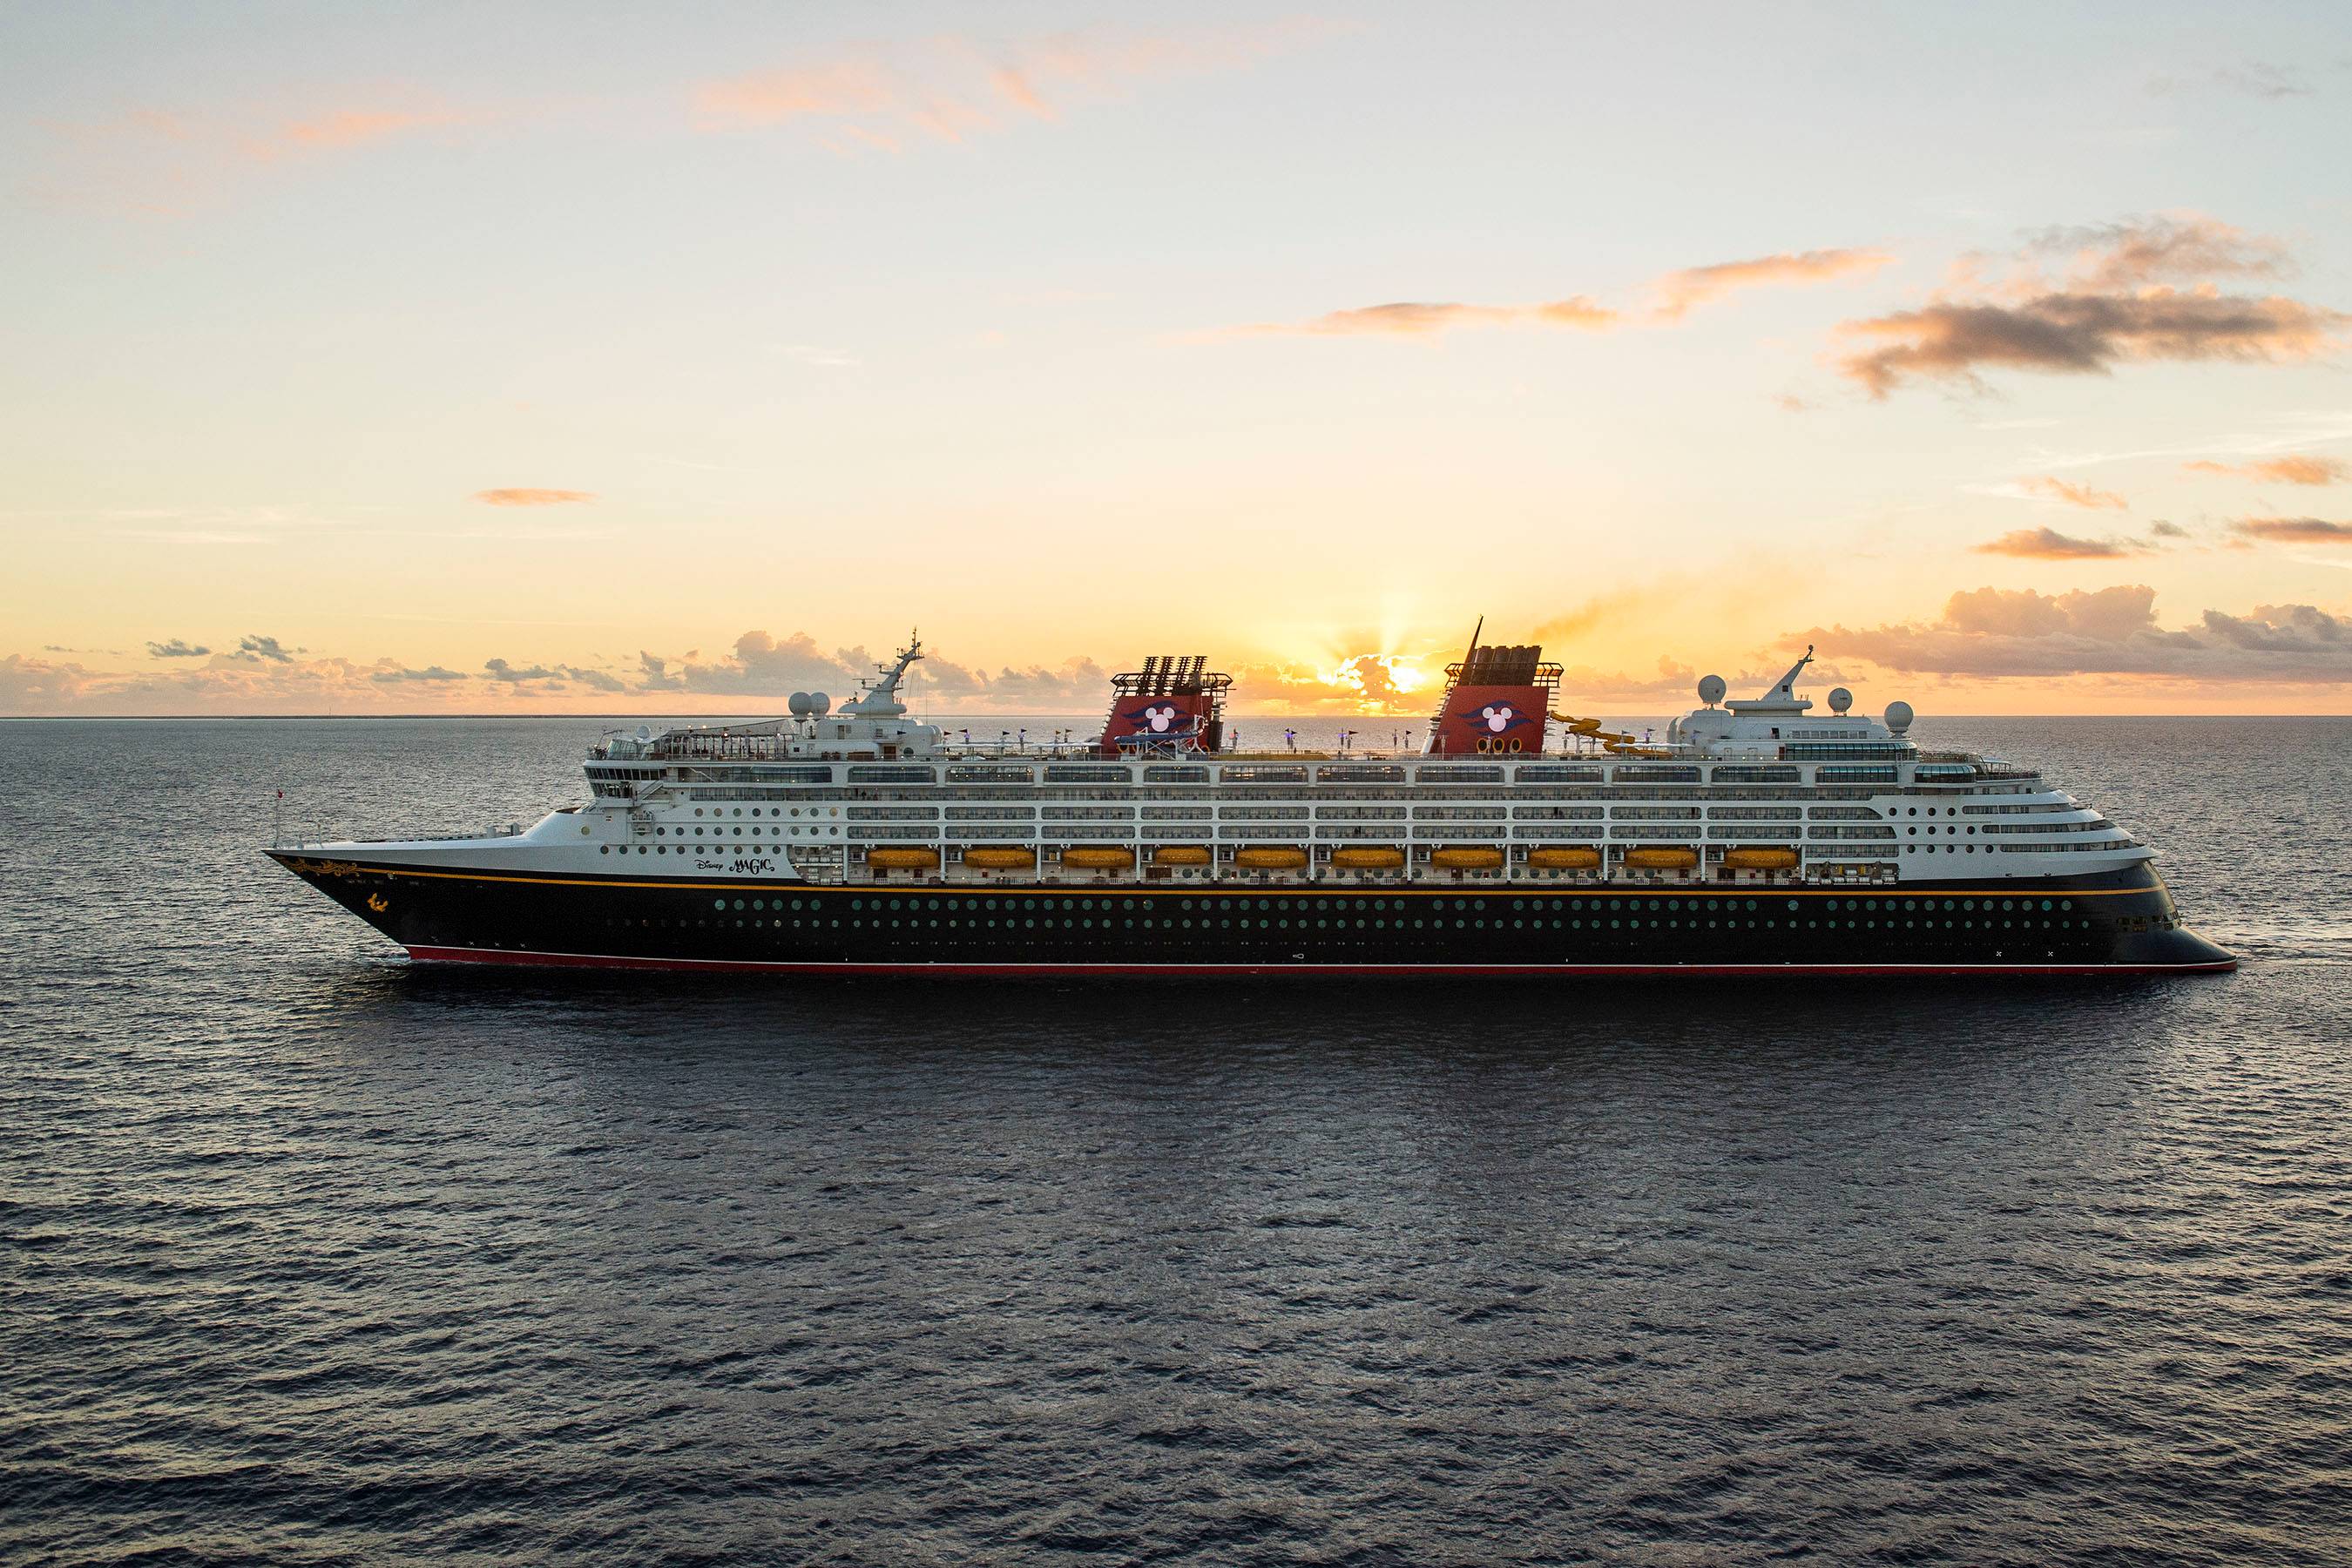 VIDEO - Take a virtual ride on the Disney Magic AquaDunk coming later this year